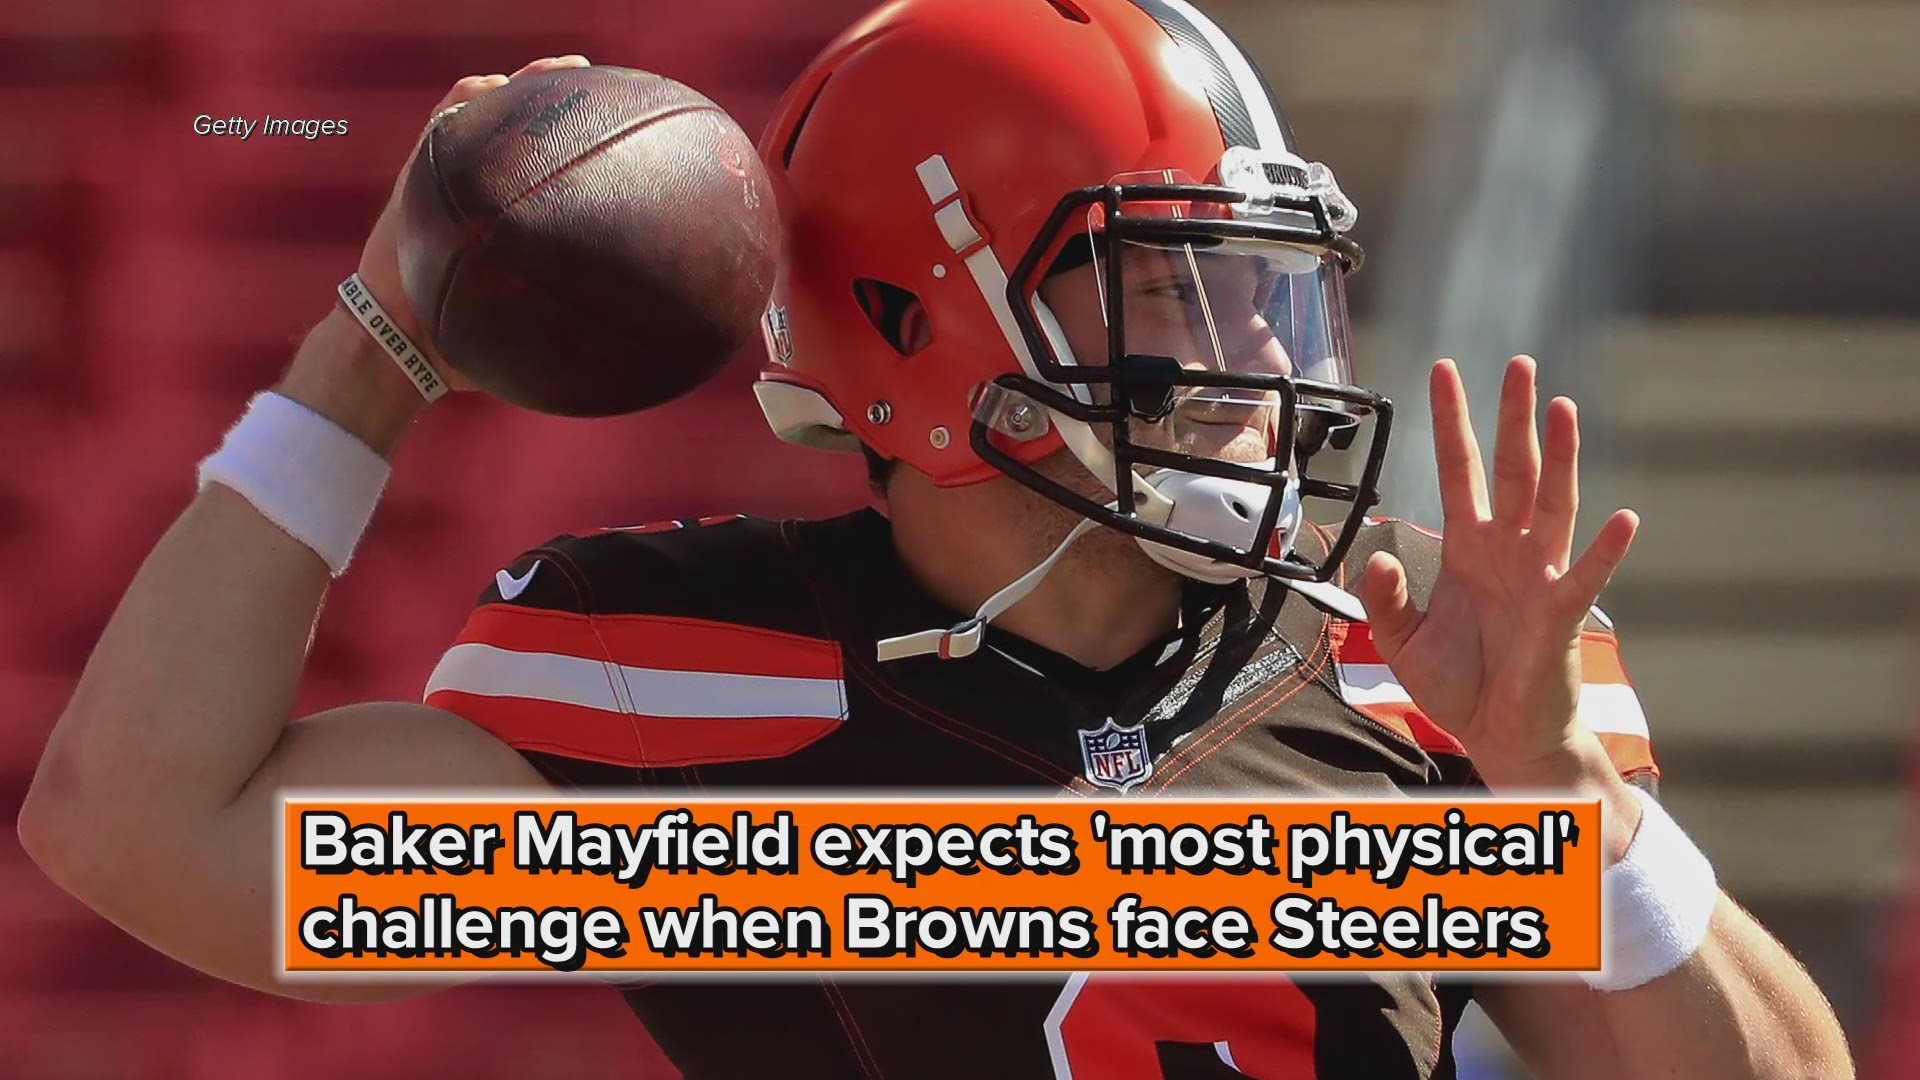 Baker Mayfield expects 'most physical' challenge when Cleveland Browns face Pittsburgh Steelers